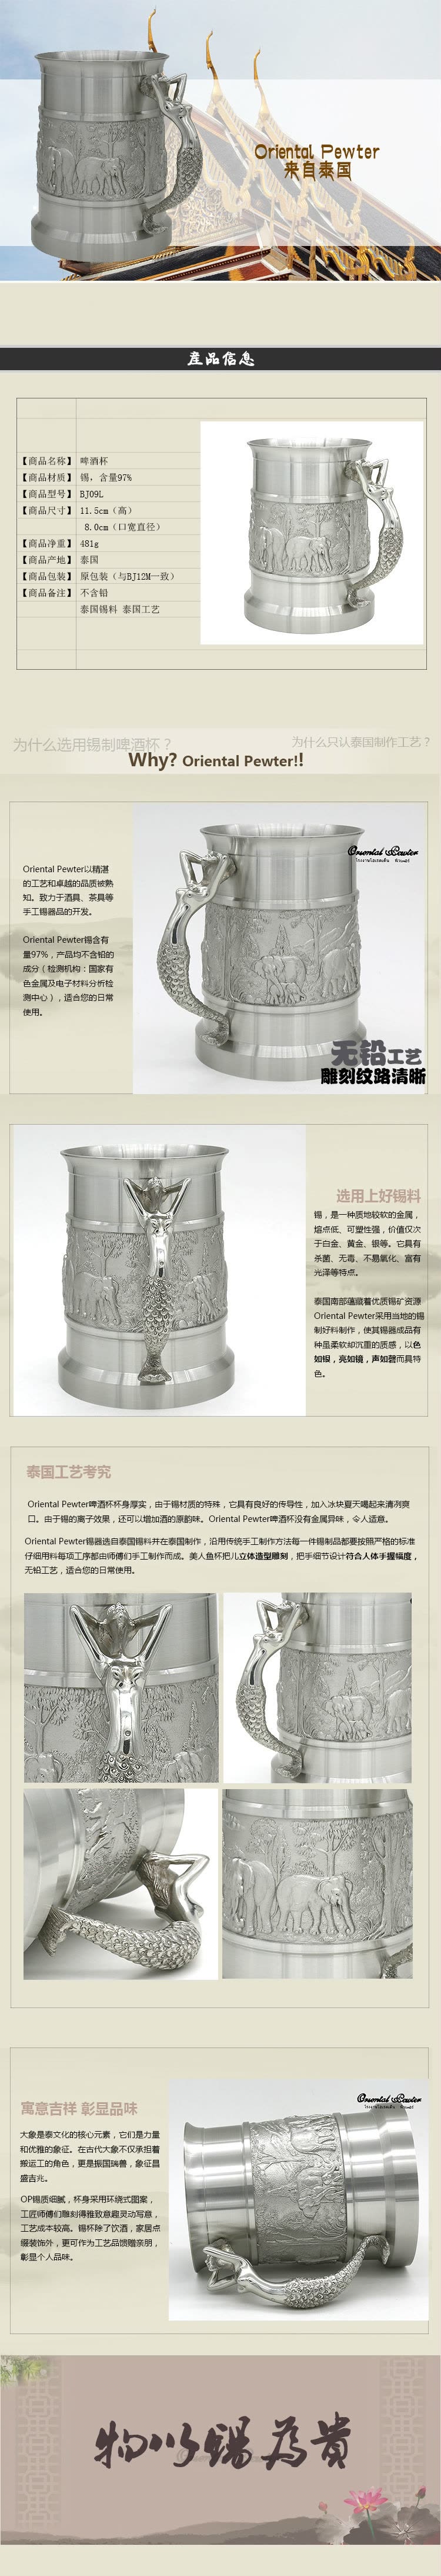 Shop Oriental Pewter Pewter Beer Mug Pure Tin 97 Lead Free Pewter Bj09l Hand Carved Beautiful Embossed Handmade In Thailand Online From Best Arts Crafts On Jd Com Global Site